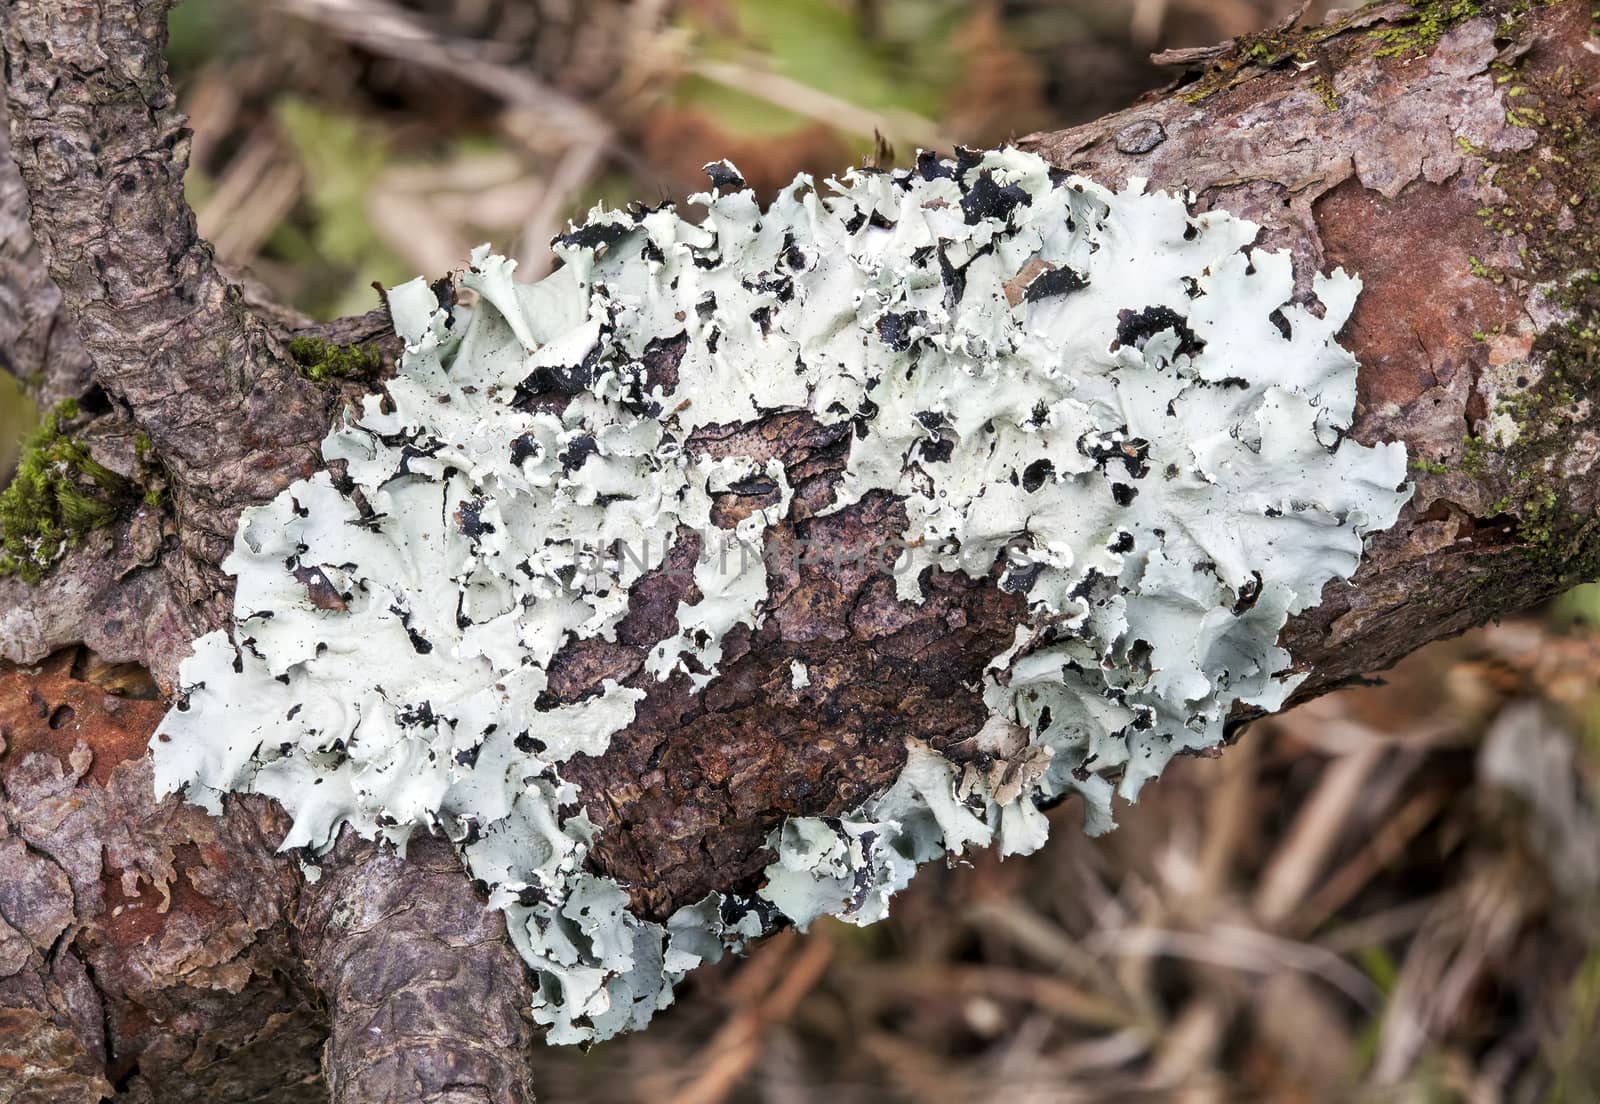 Lichen growing on a decaying tree trunkb in the autumn fall